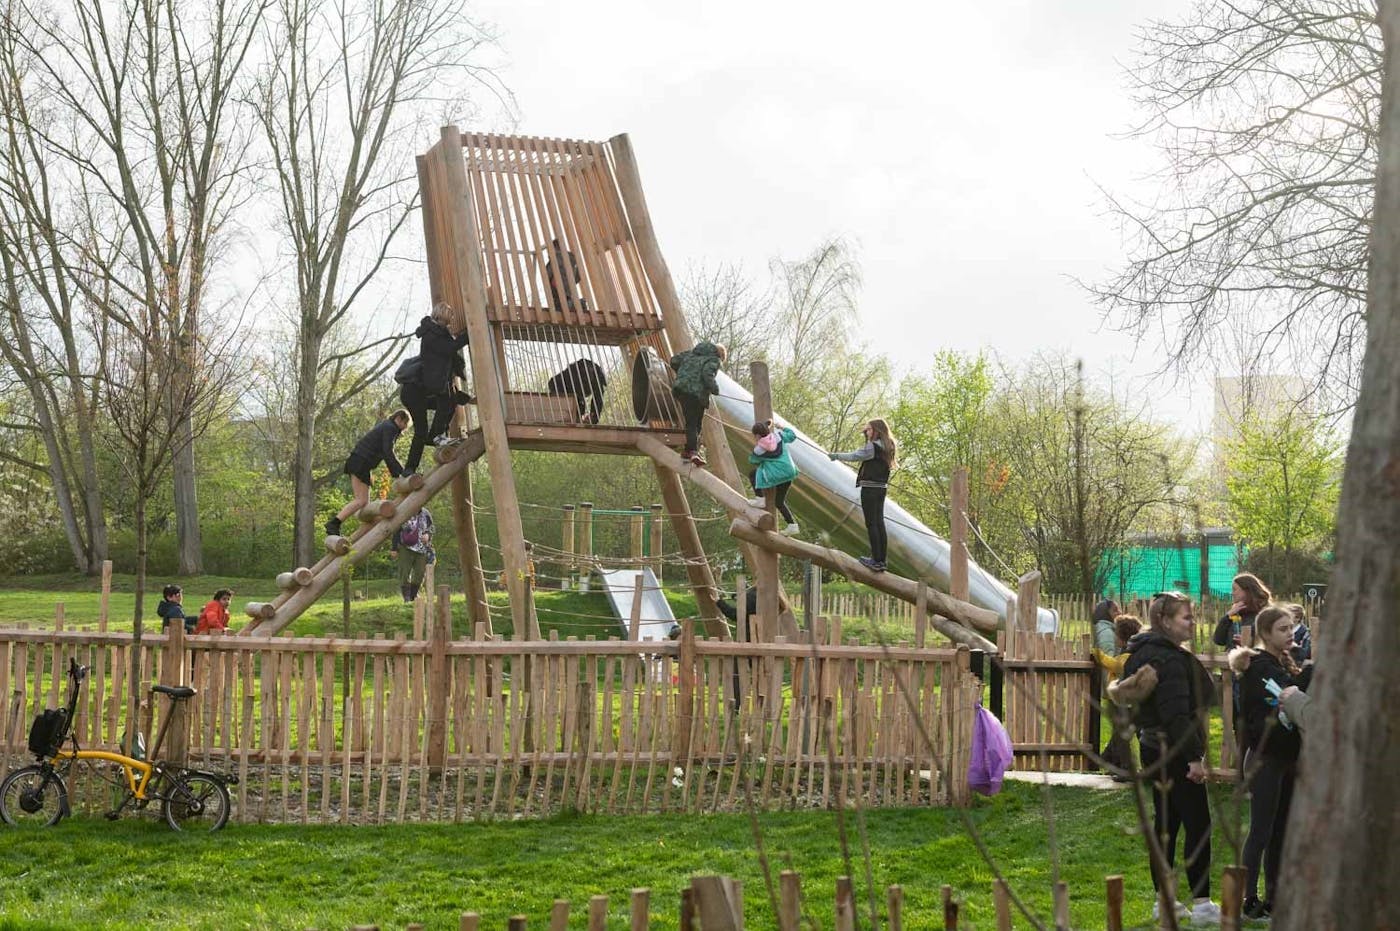 a group of people on a wooden structure